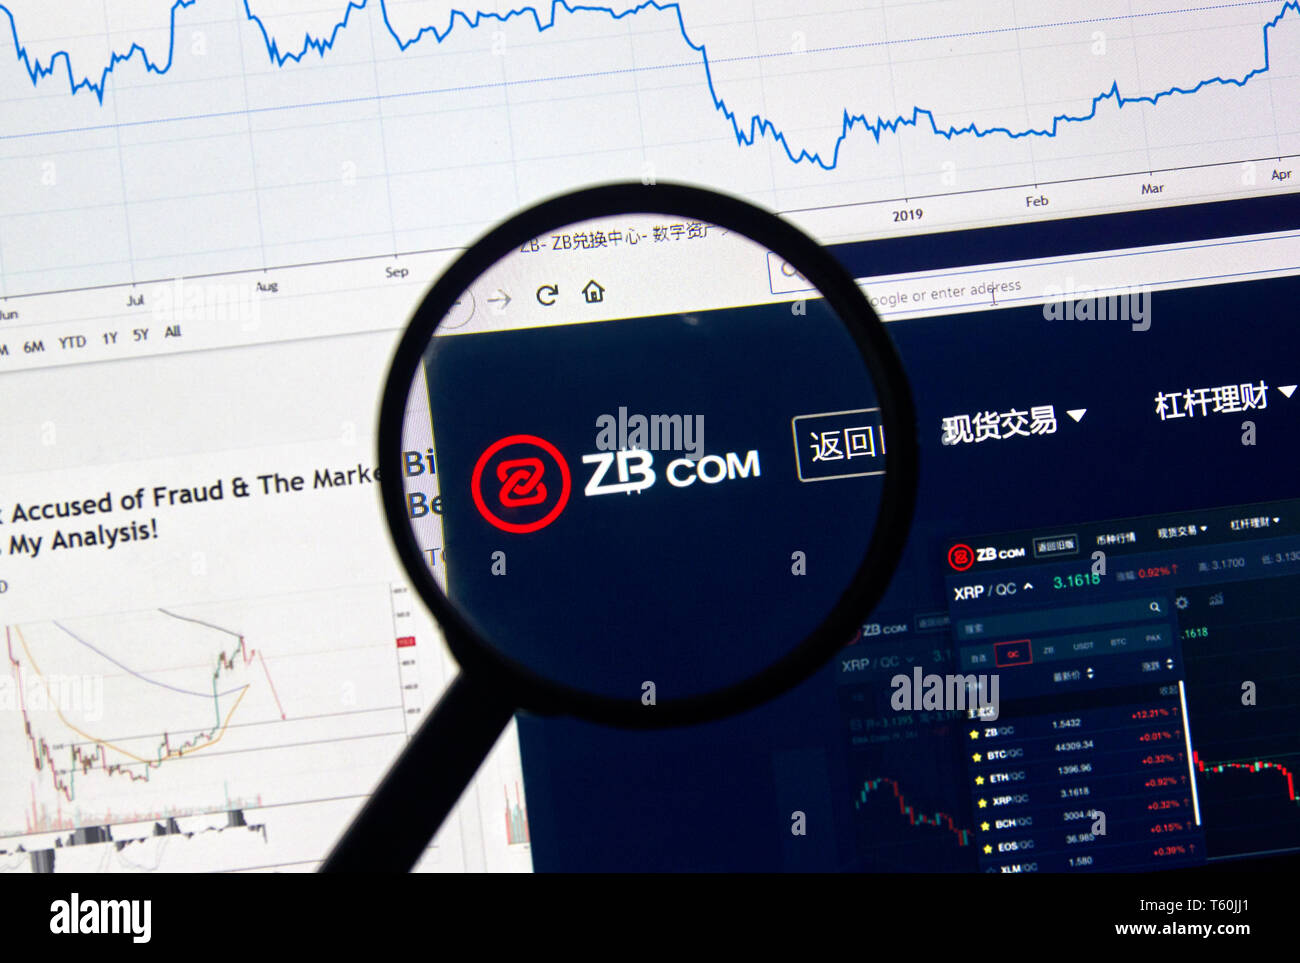 MONTREAL, CANADA - APRIL 26, 2019: ZB.com cryptocurrency digital assets exchange logo and home page on a laptop screen under magnifying glass. Stock Photo